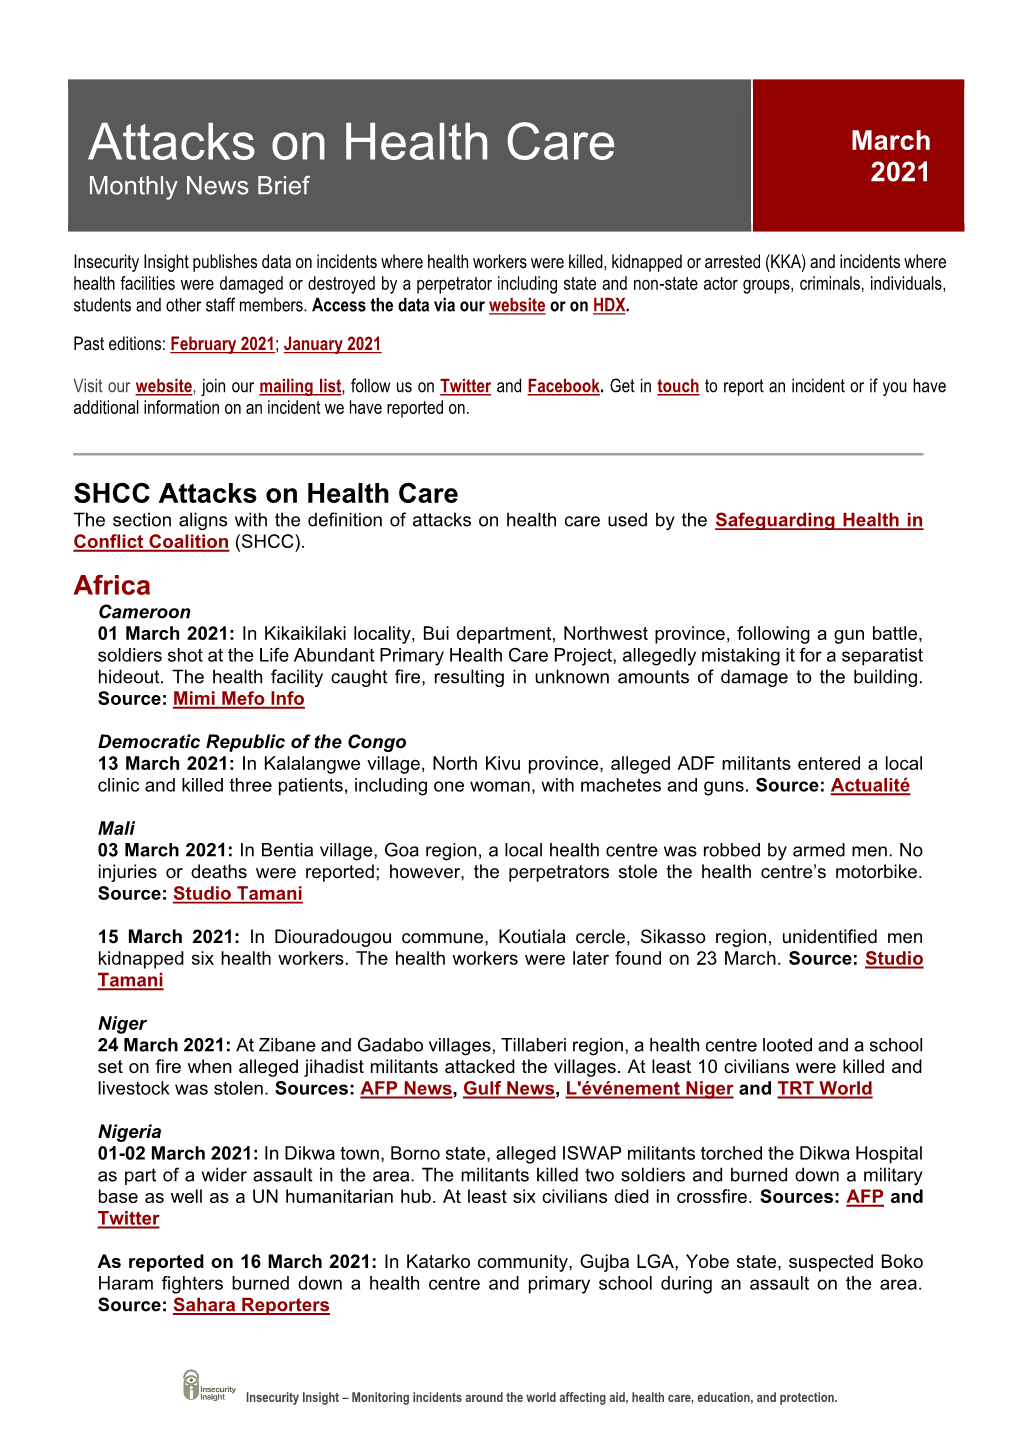 Attacks on Health Care March 2021 Monthly News Brief